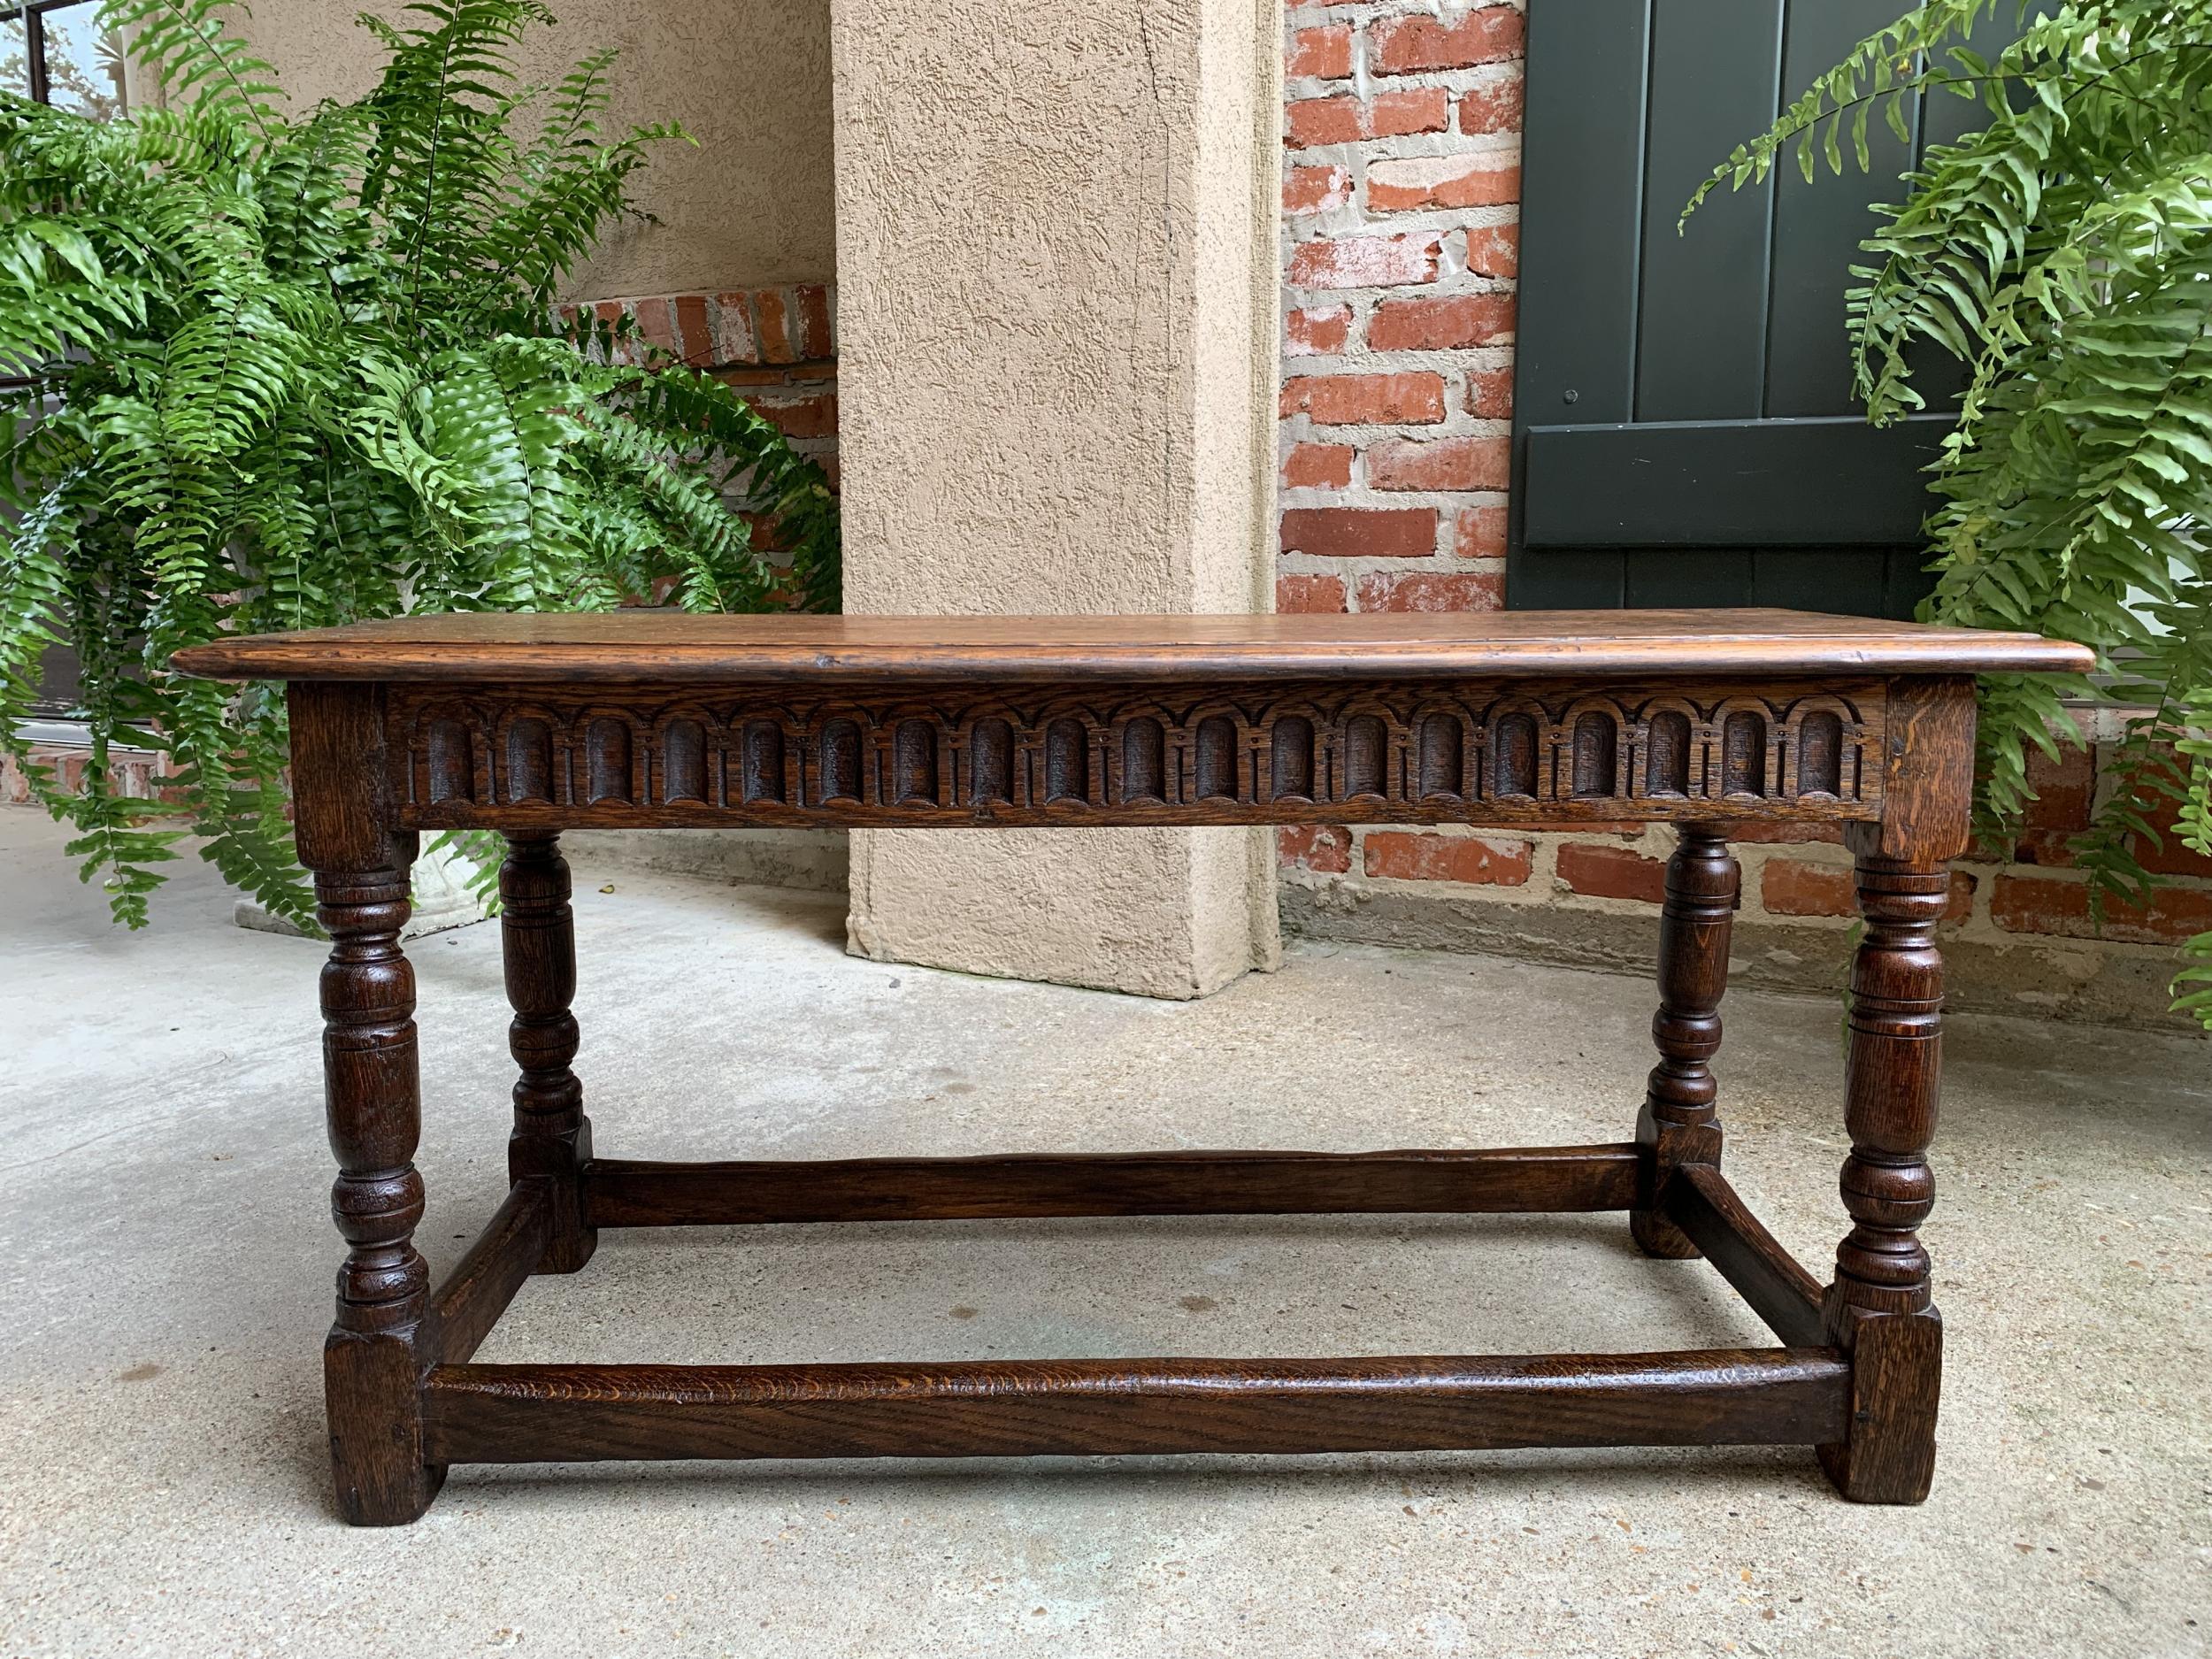 British Antique English Carved Oak Pegged Joint Stool Duet Bench Window Seat, c1900